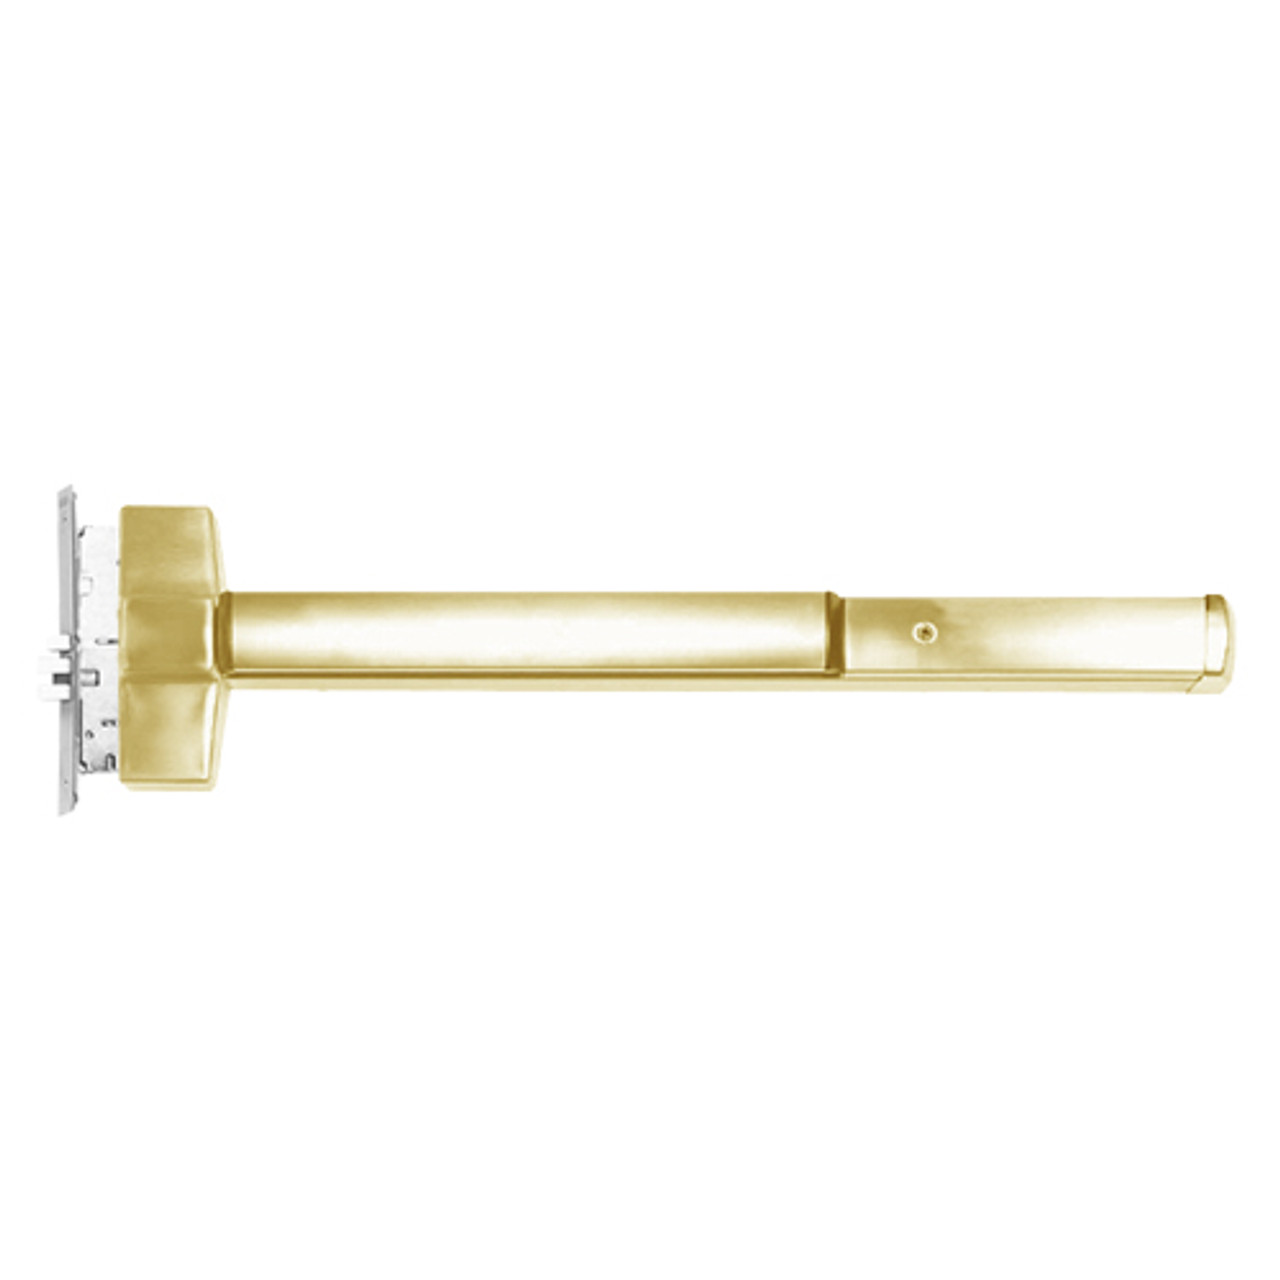 ED5600L-606-MELR-M92-RHR Corbin ED5600 Series Non Fire Rated Mortise Exit Device with Motorized Latch Retraction and Touchbar Monitoring in Satin Brass Finish